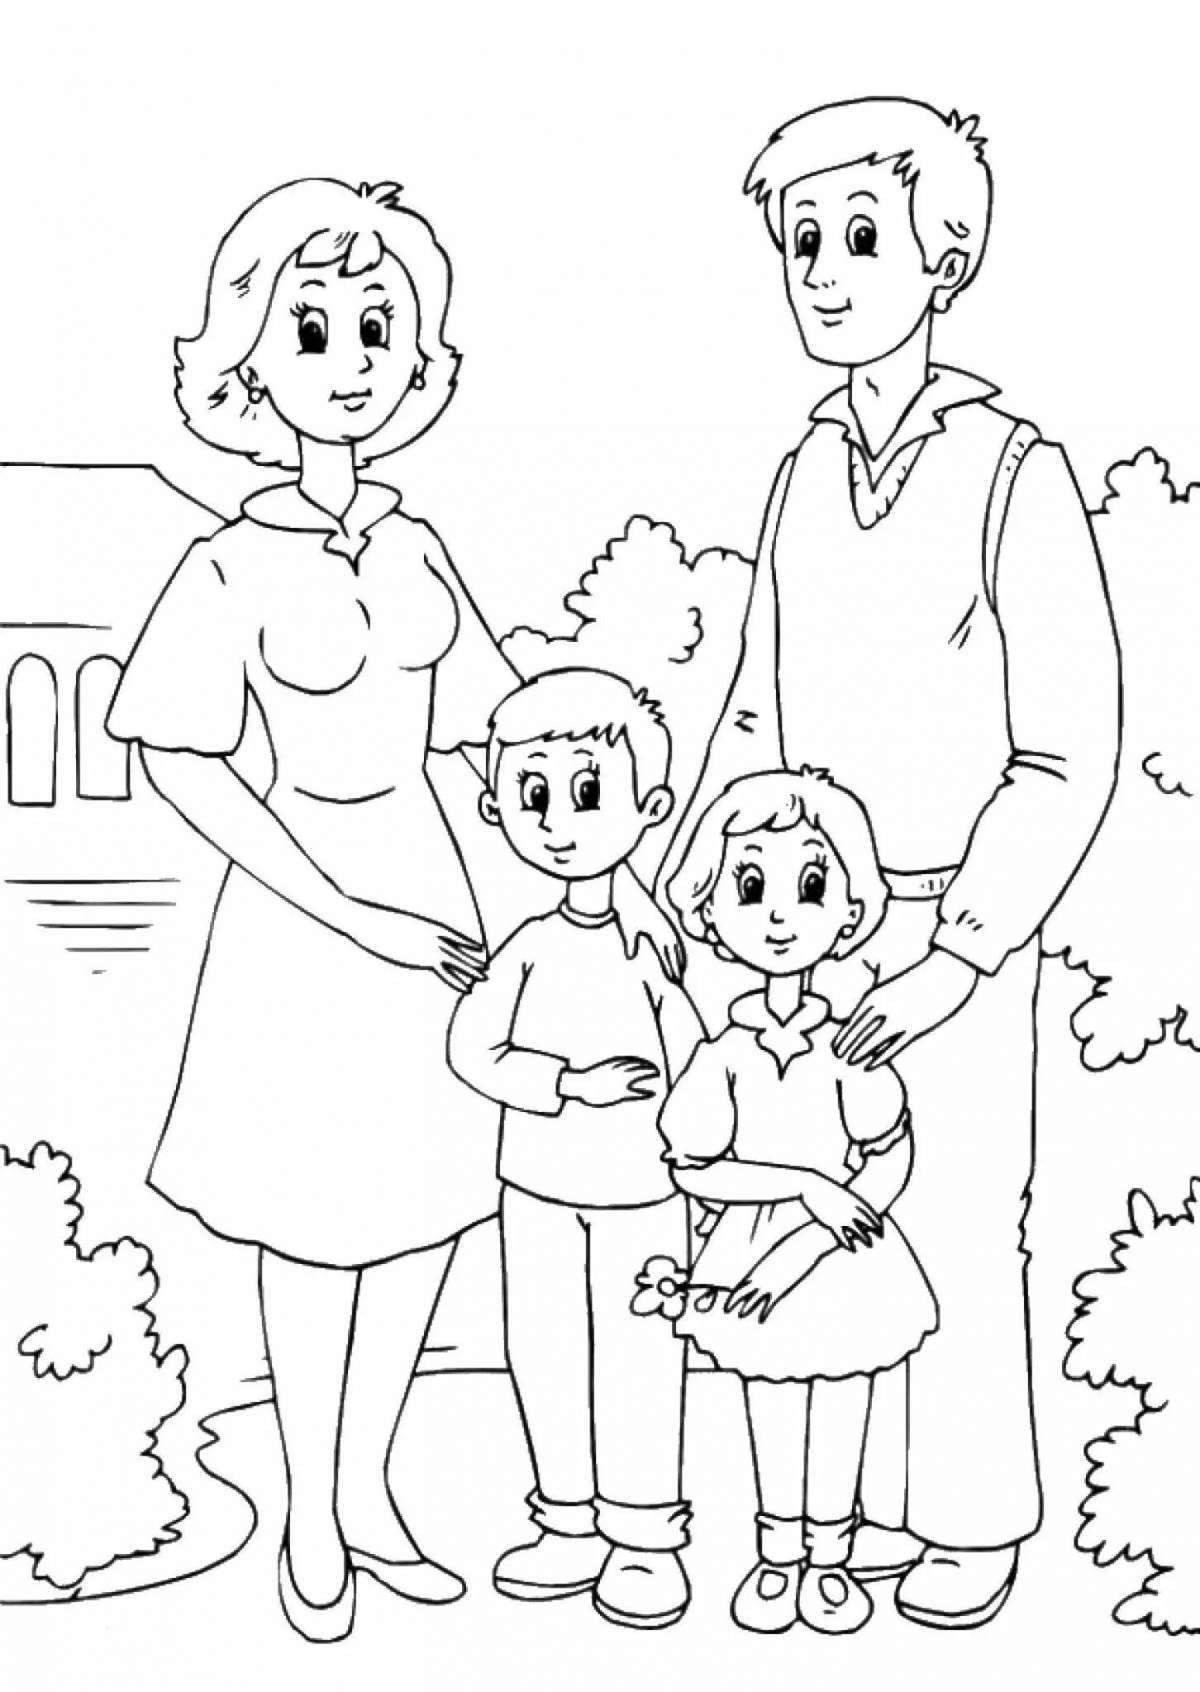 Bright family coloring for children 6-7 years old